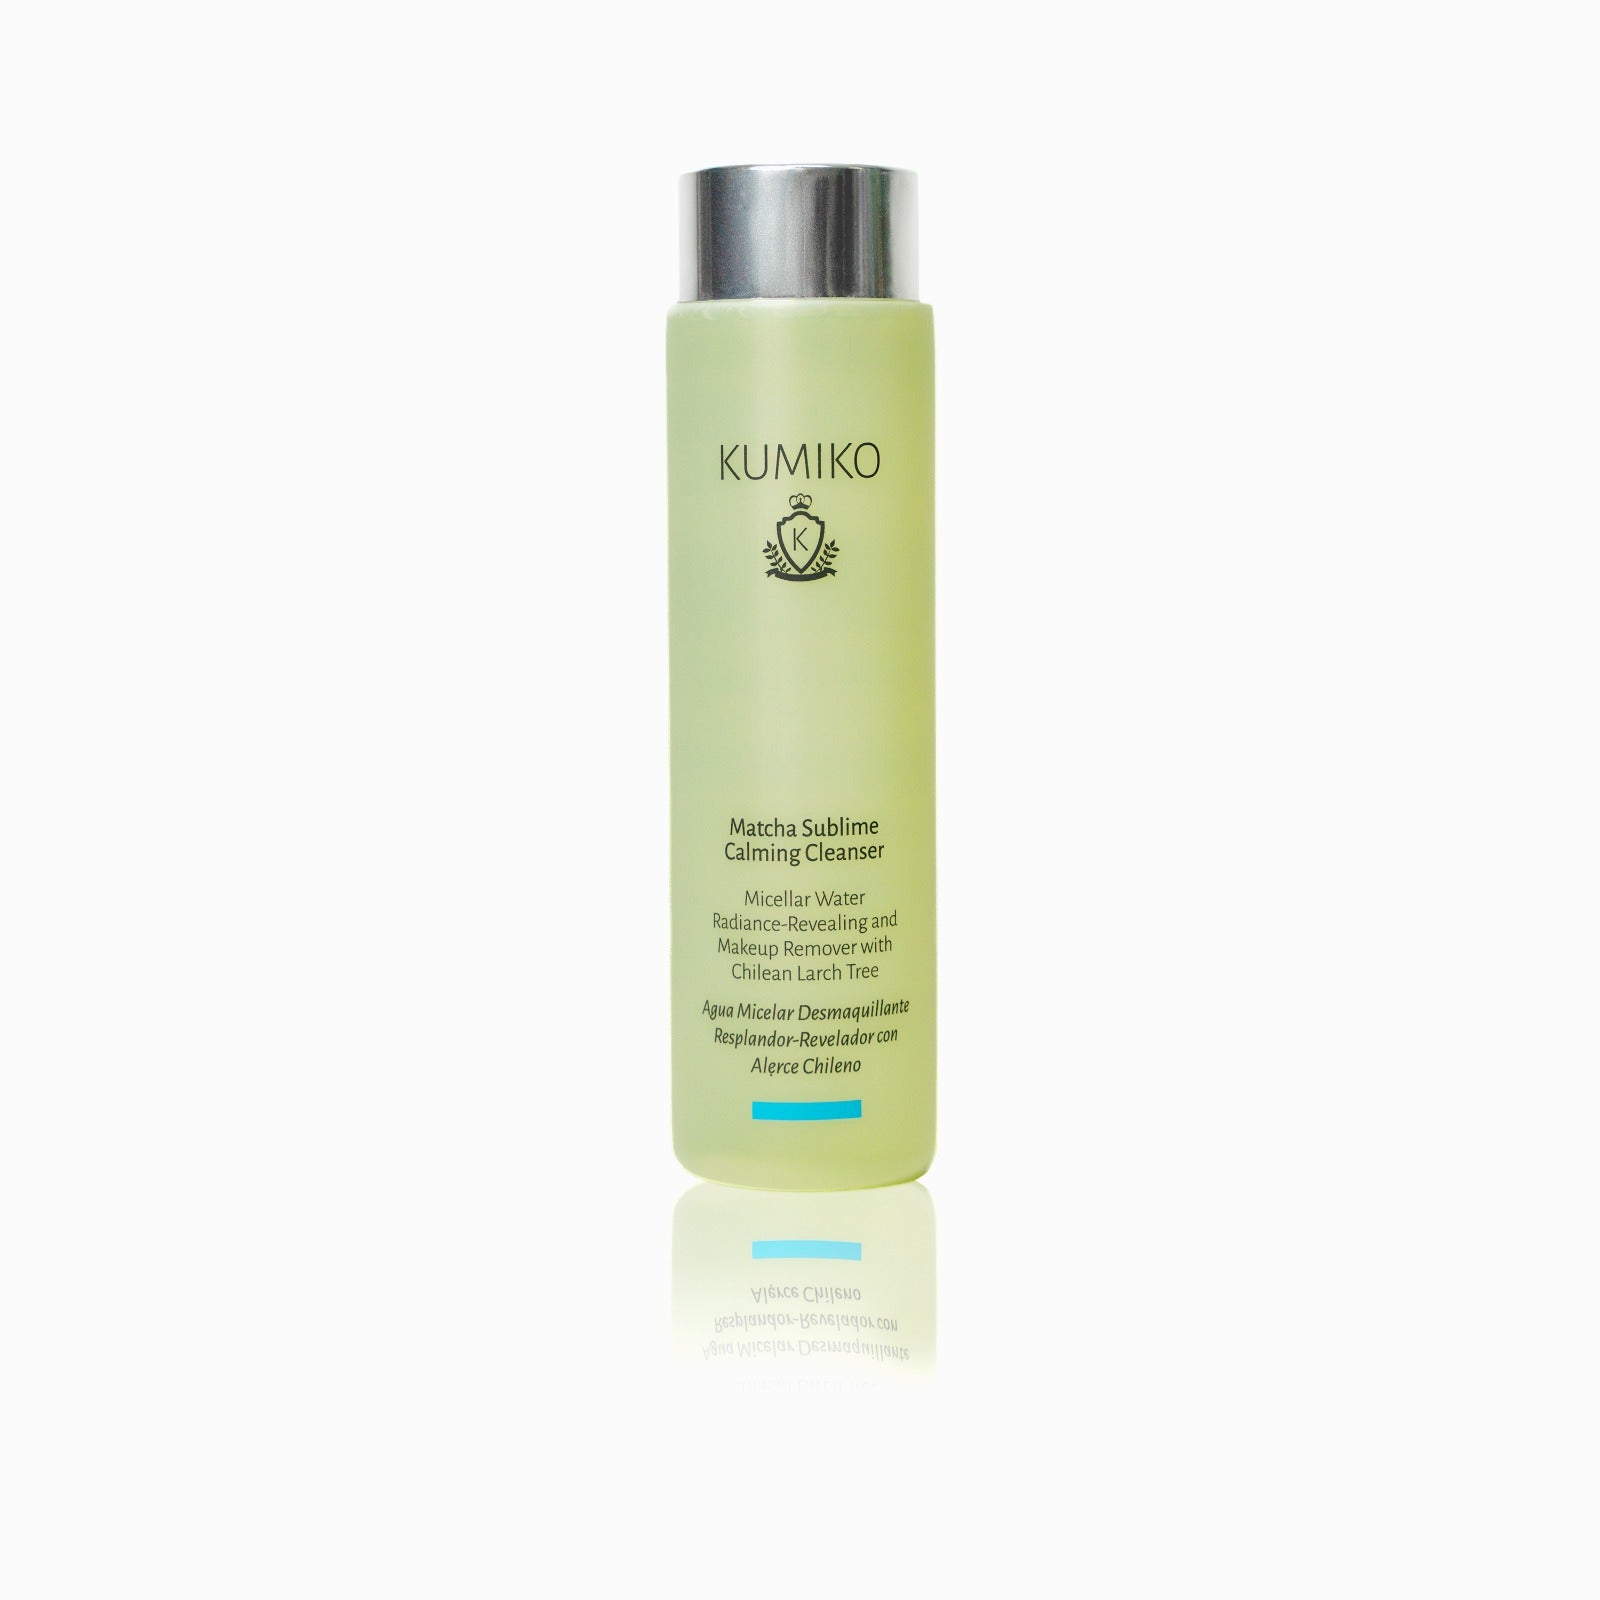 Matcha Sublime Calming Cleanser